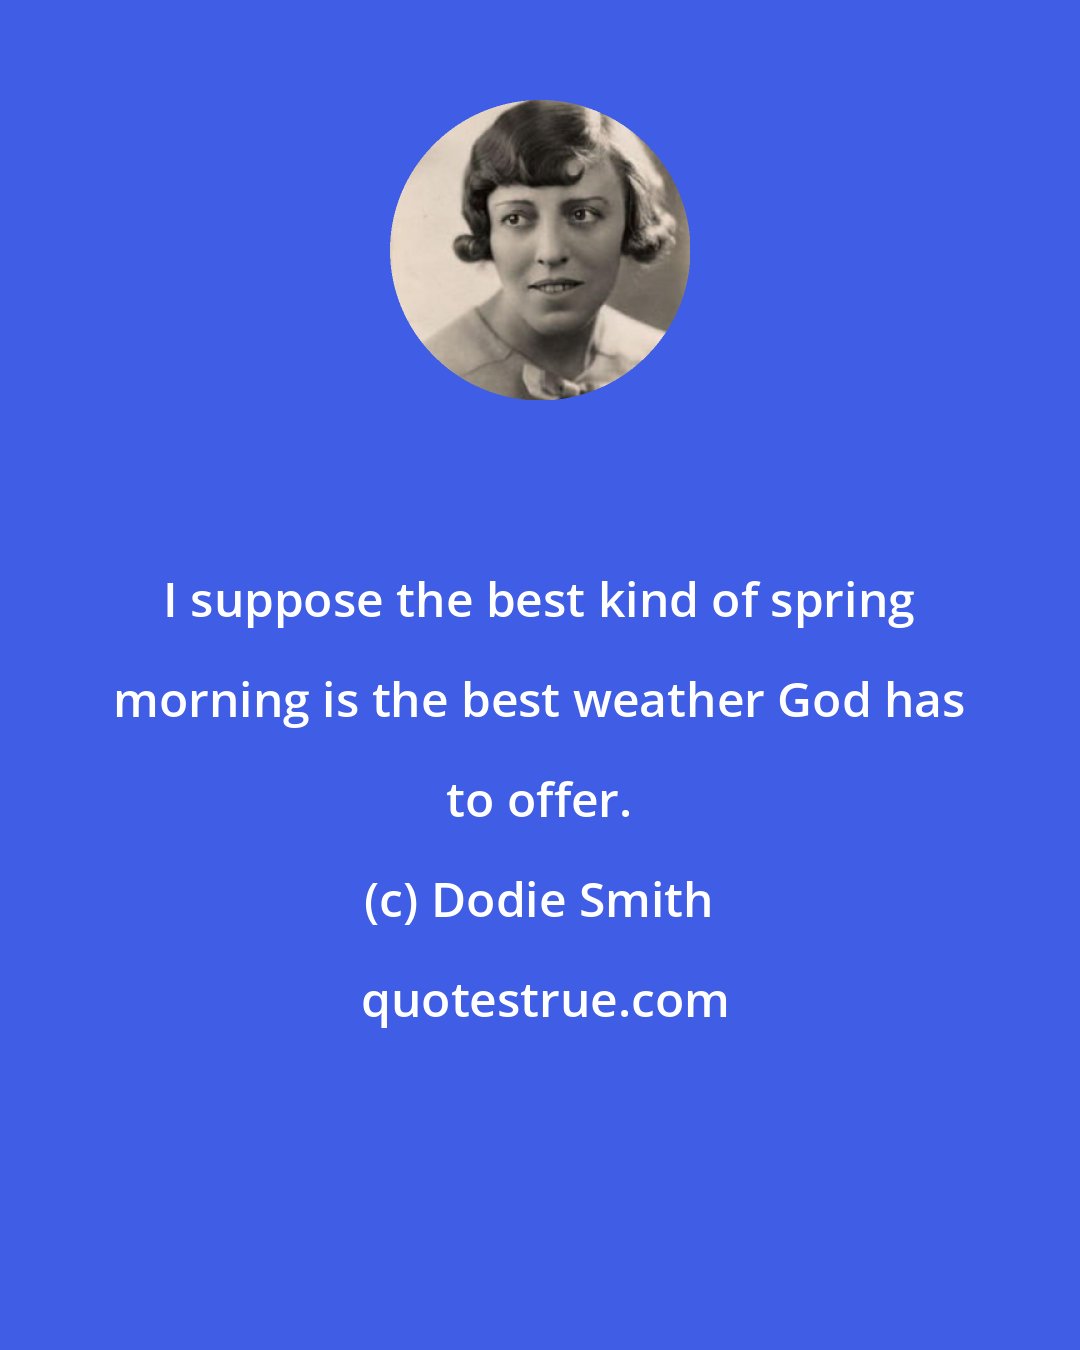 Dodie Smith: I suppose the best kind of spring morning is the best weather God has to offer.